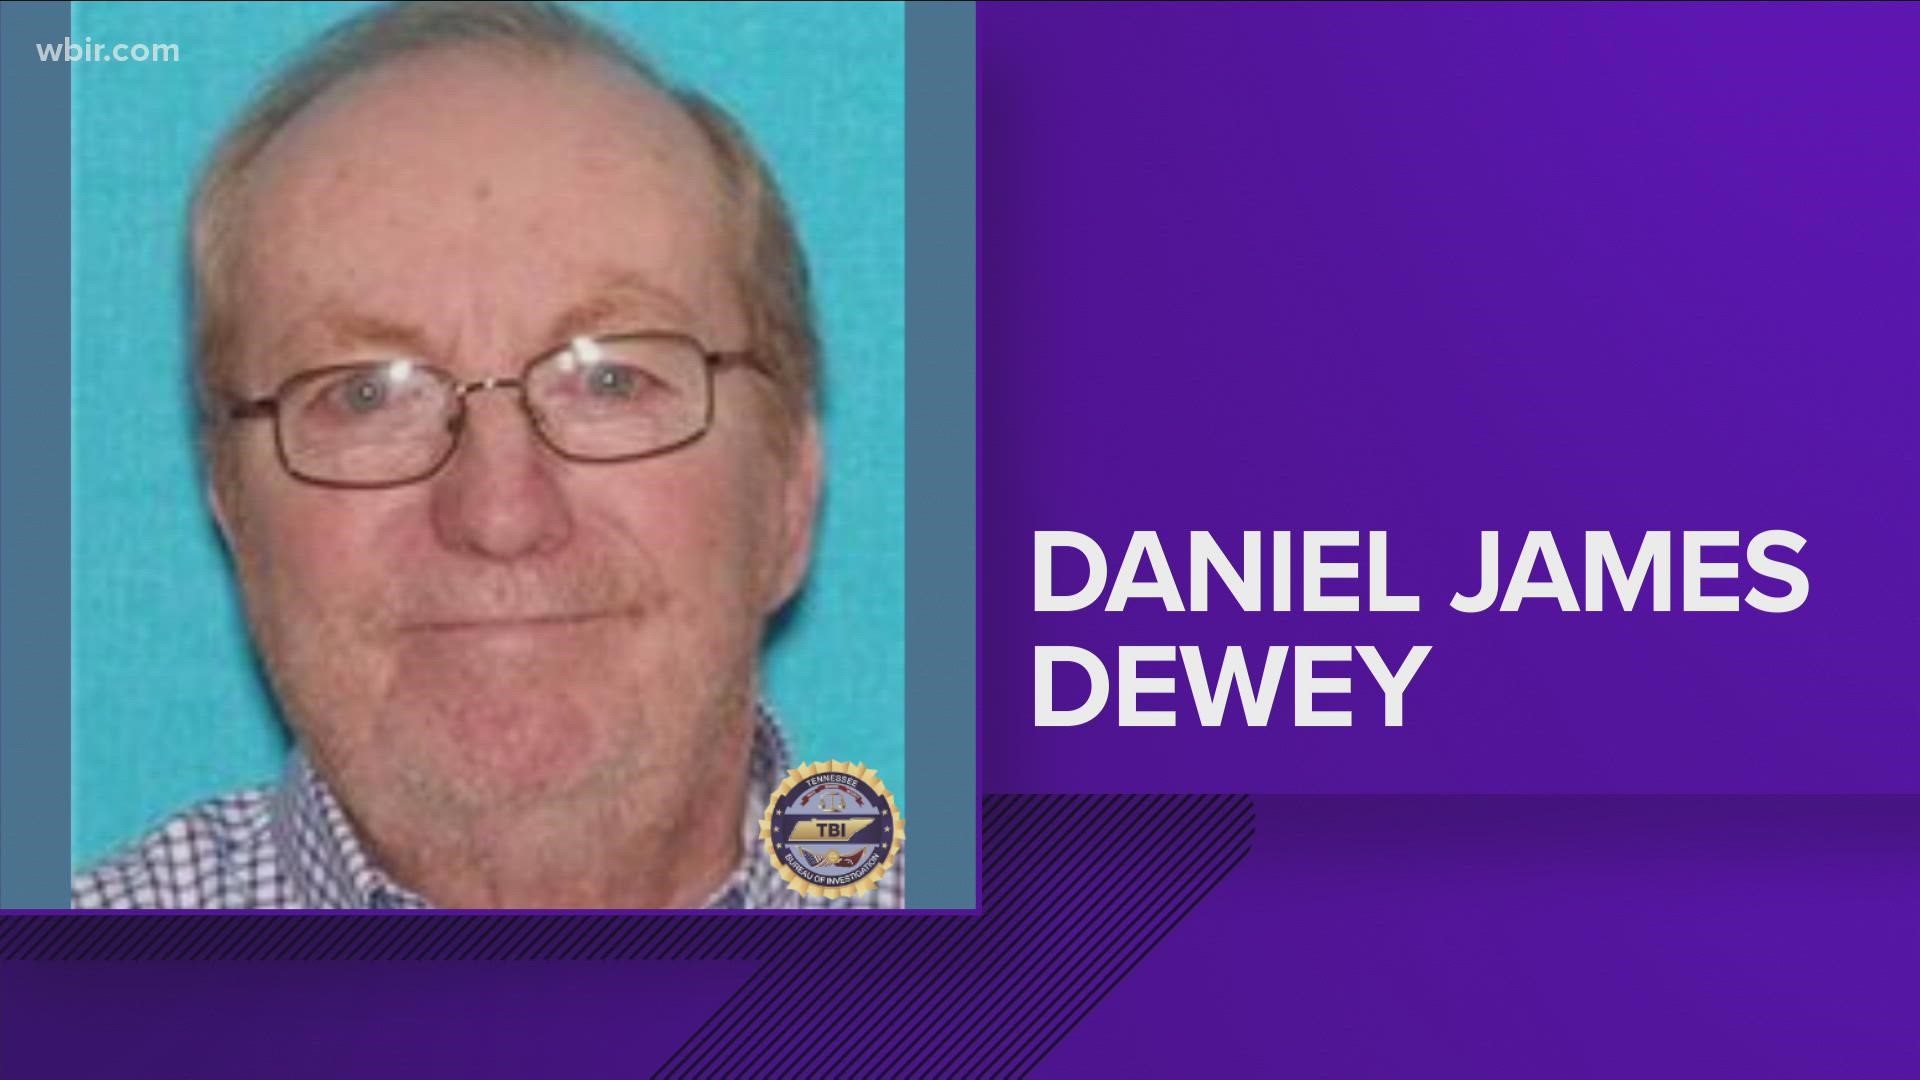 The Knoxville man was last seen on March 23, according to the Tennessee Bureau of Investigation.